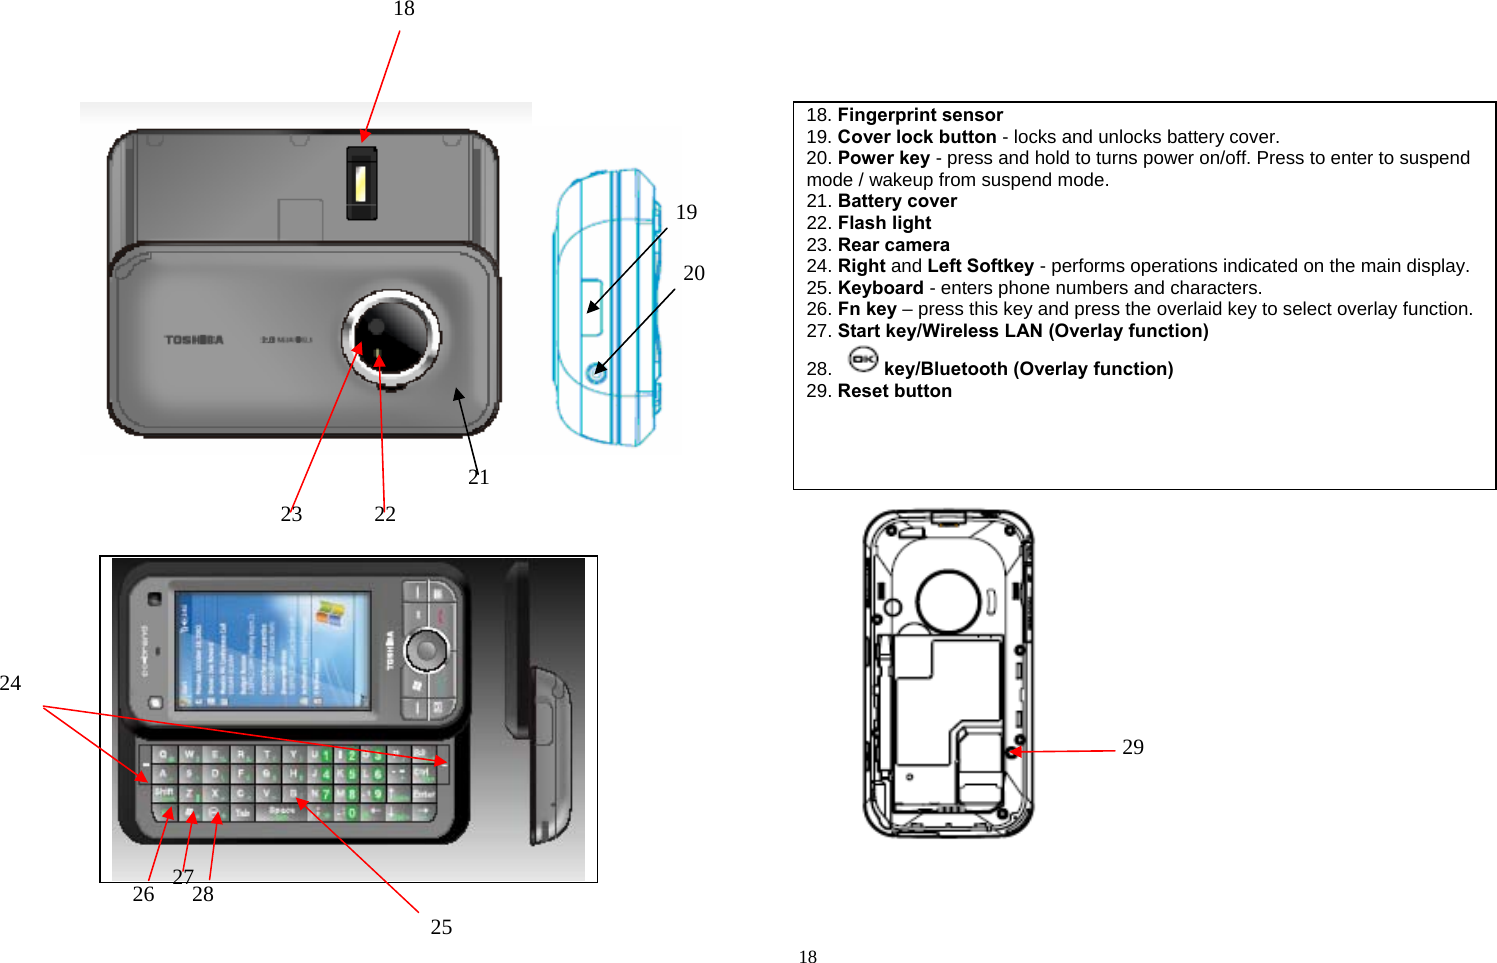   18                                     18. Fingerprint sensor 19. Cover lock button - locks and unlocks battery cover. 20. Power key - press and hold to turns power on/off. Press to enter to suspend mode / wakeup from suspend mode. 21. Battery cover 22. Flash light 23. Rear camera 24. Right and Left Softkey - performs operations indicated on the main display. 25. Keyboard - enters phone numbers and characters. 26. Fn key – press this key and press the overlaid key to select overlay function. 27. Start key/Wireless LAN (Overlay function) 28.  key/Bluetooth (Overlay function) 29. Reset button 18 19 20 21 22 23 24 25 29 26  27 28 